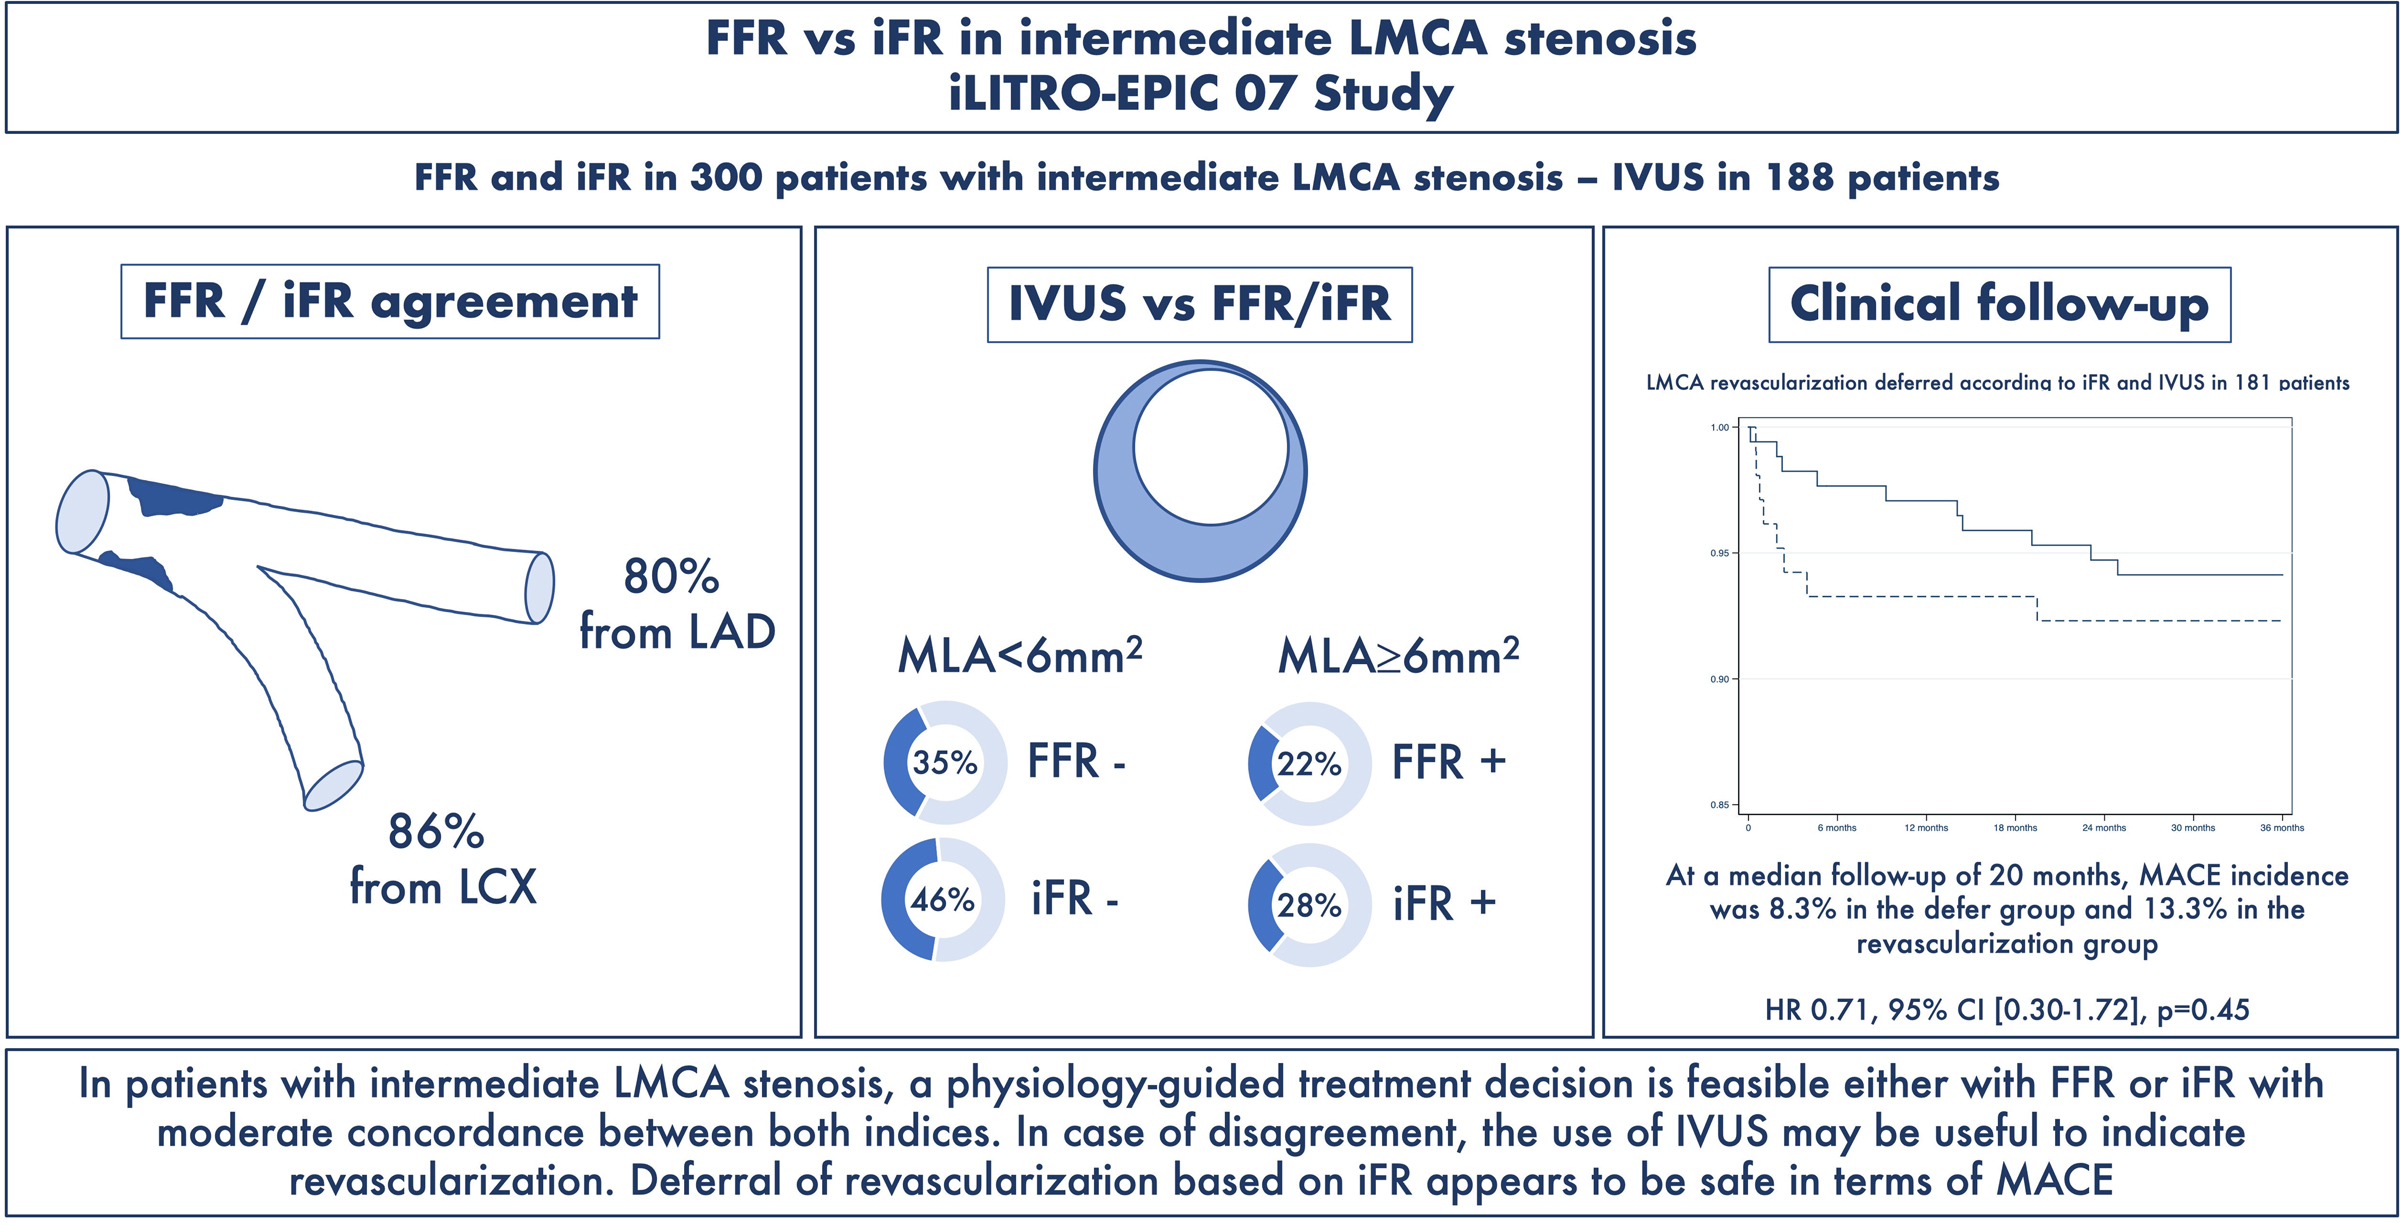 Instantaneous Wave-Free Ratio for the Assessment of Intermediate Left Main Coronary Artery Stenosis: Correlations With Fractional Flow Reserve/Intravascular Ultrasound and Prognostic Implications: The iLITRO-EPIC07 Study